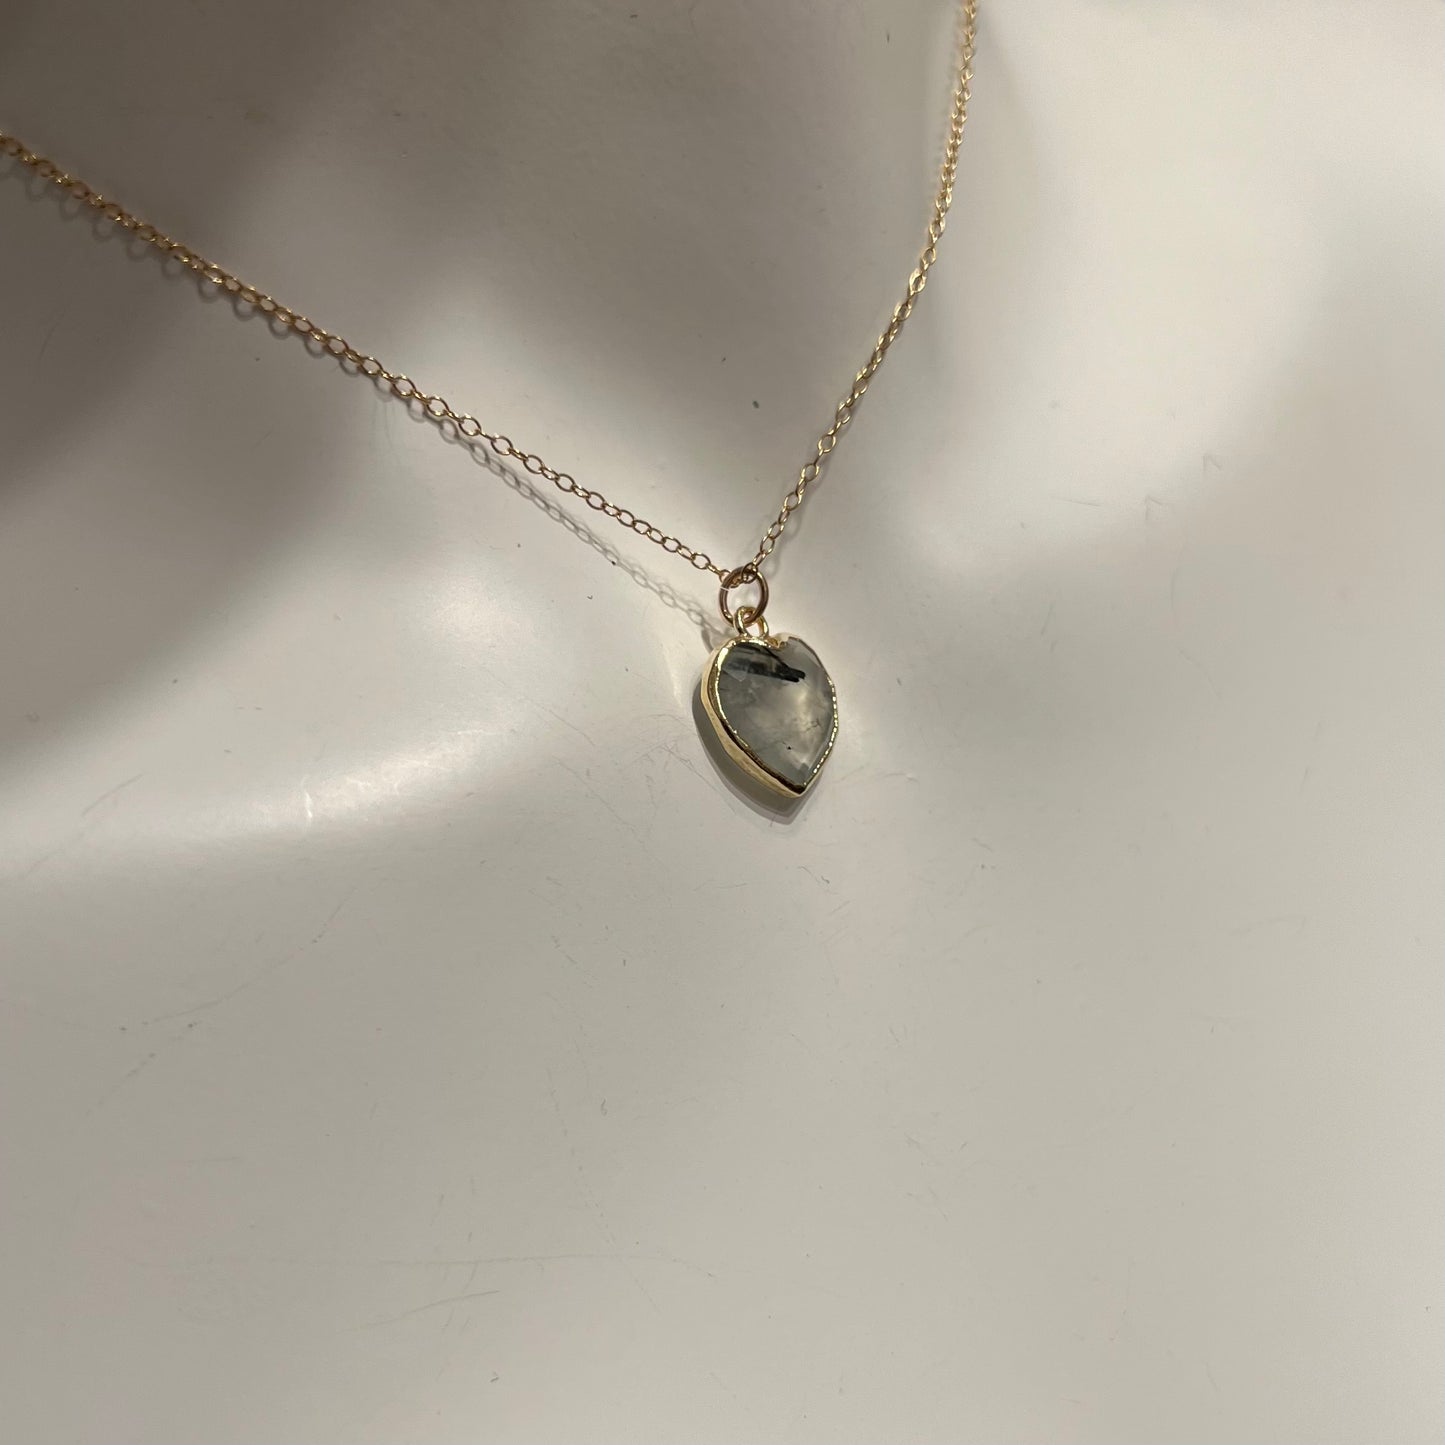 Stone Cooper facet heart necklace